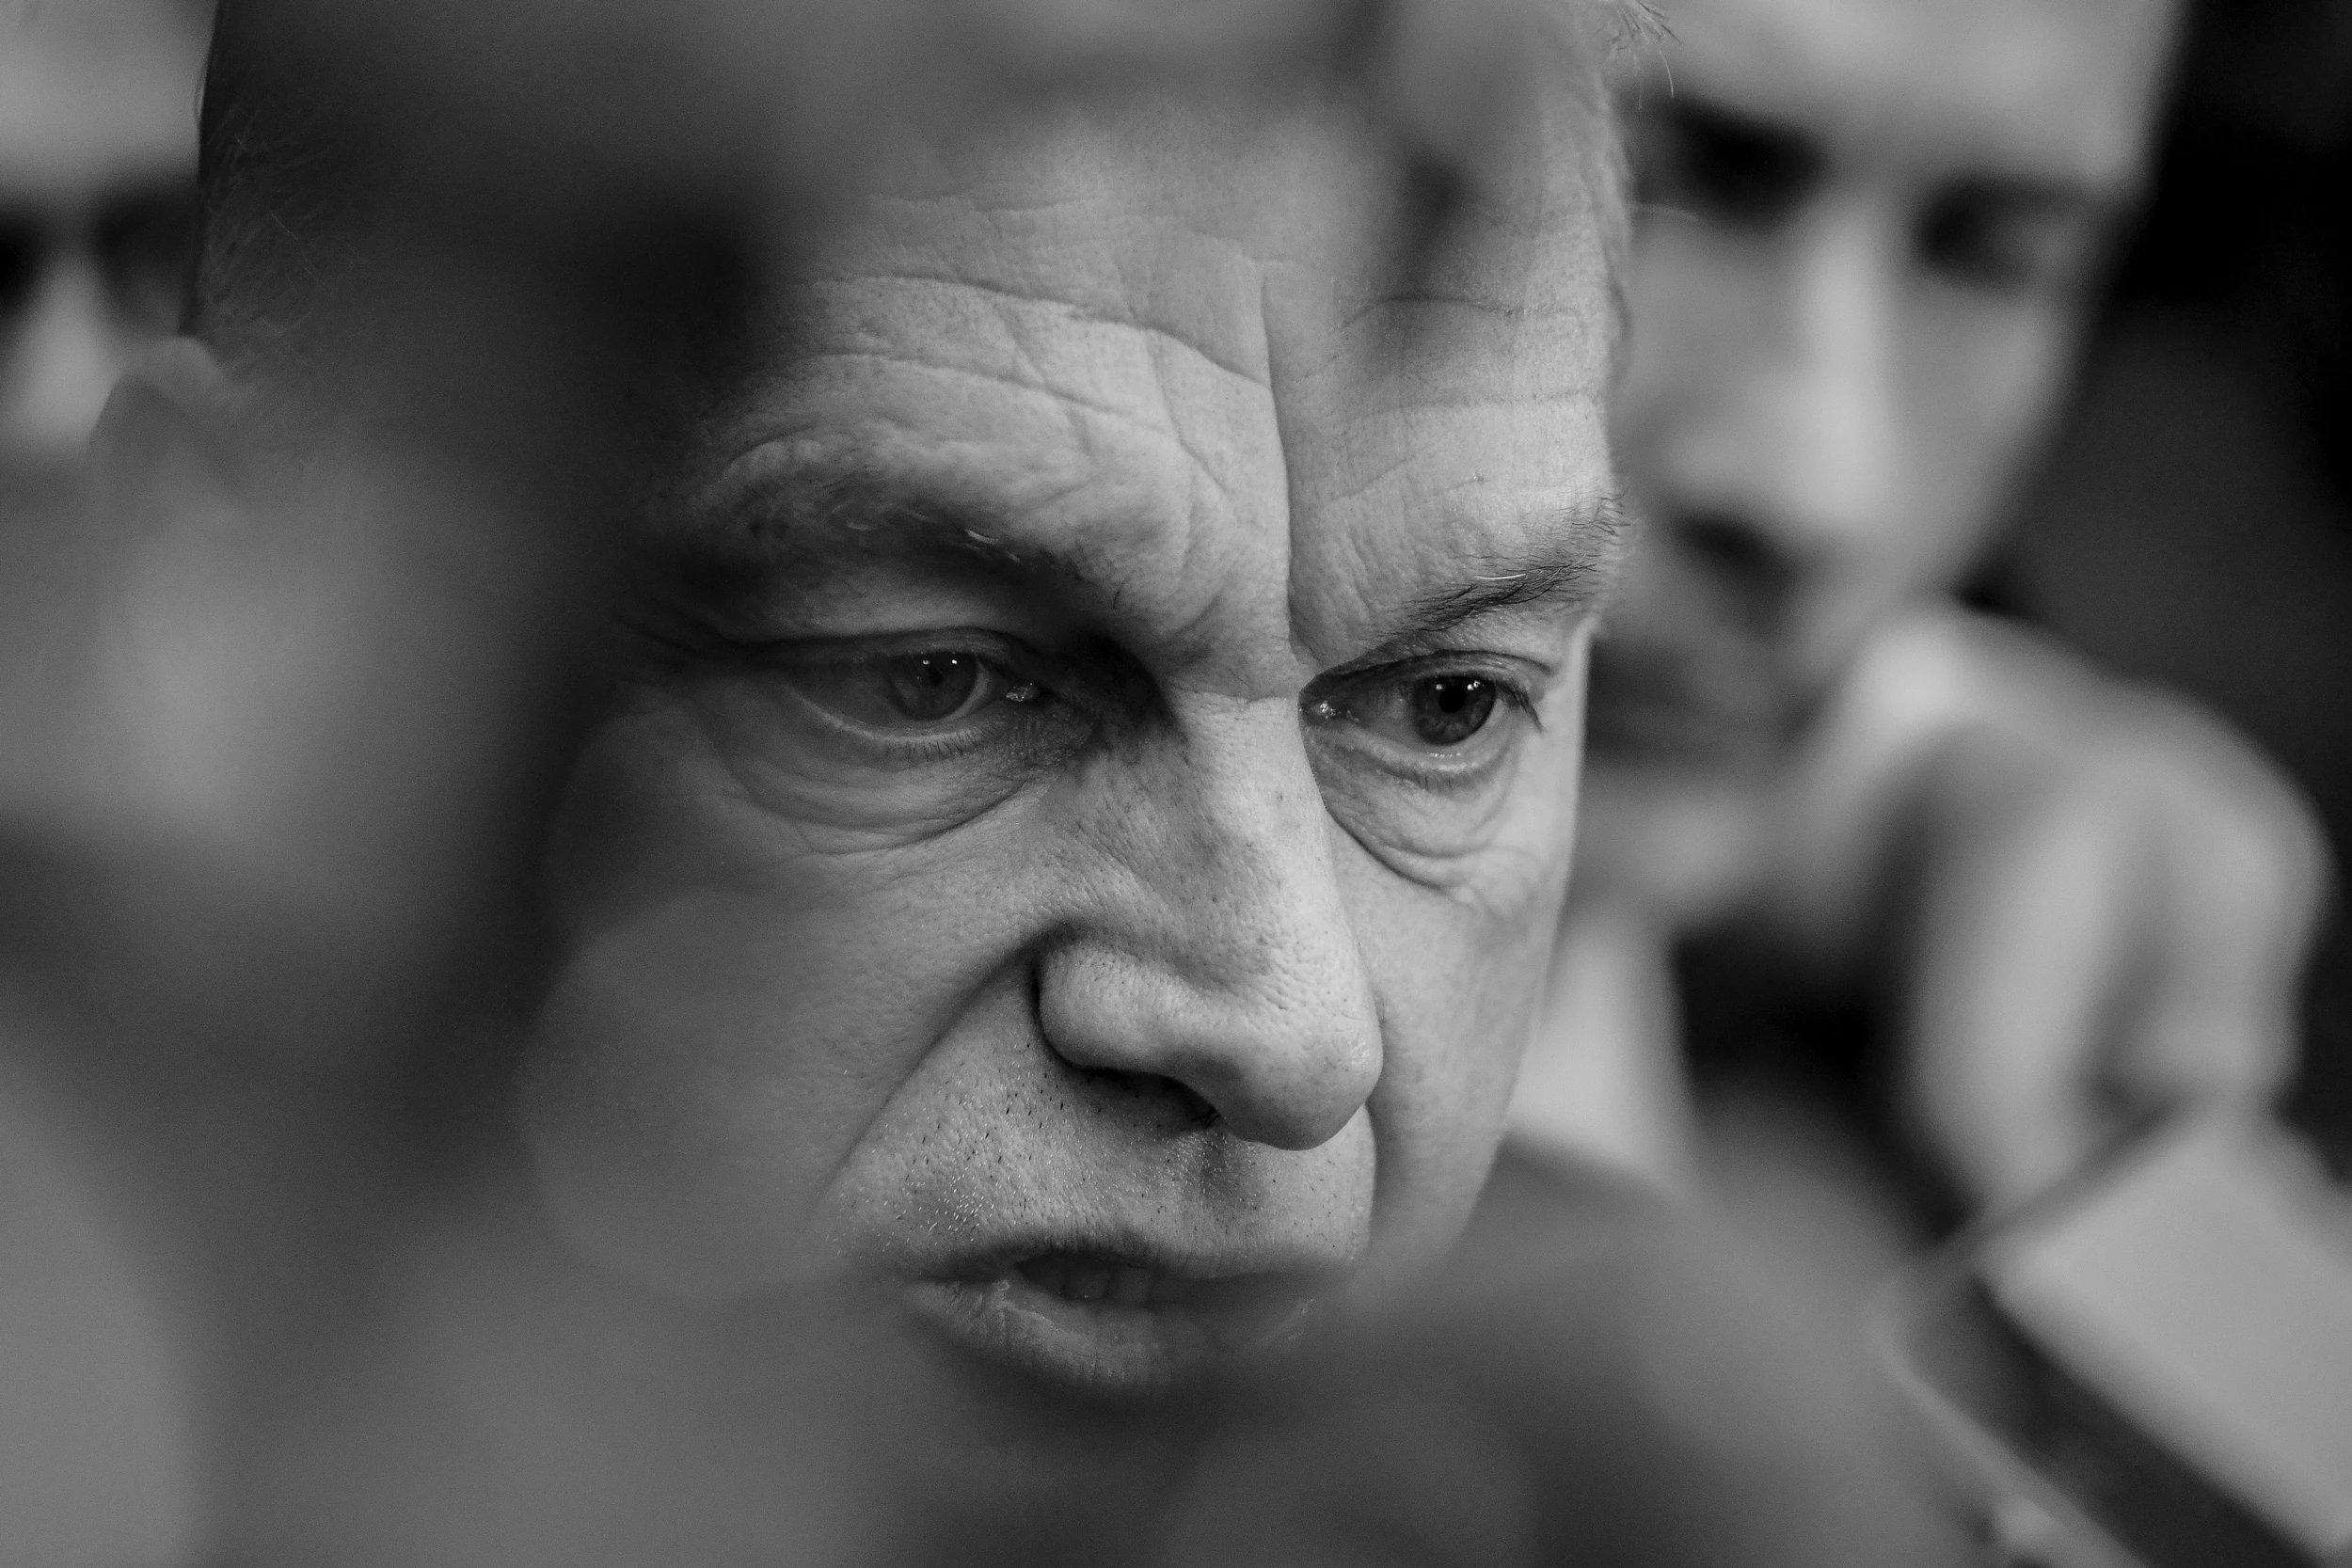 (EDITOR'S NOTE: Image was converted to black and white) Prime Minister of Hungary Viktor Orban in Brussels, Belgium, on February 21, 2020 (Photo by Riccardo Pareggiani/NurPhoto via Getty Images)